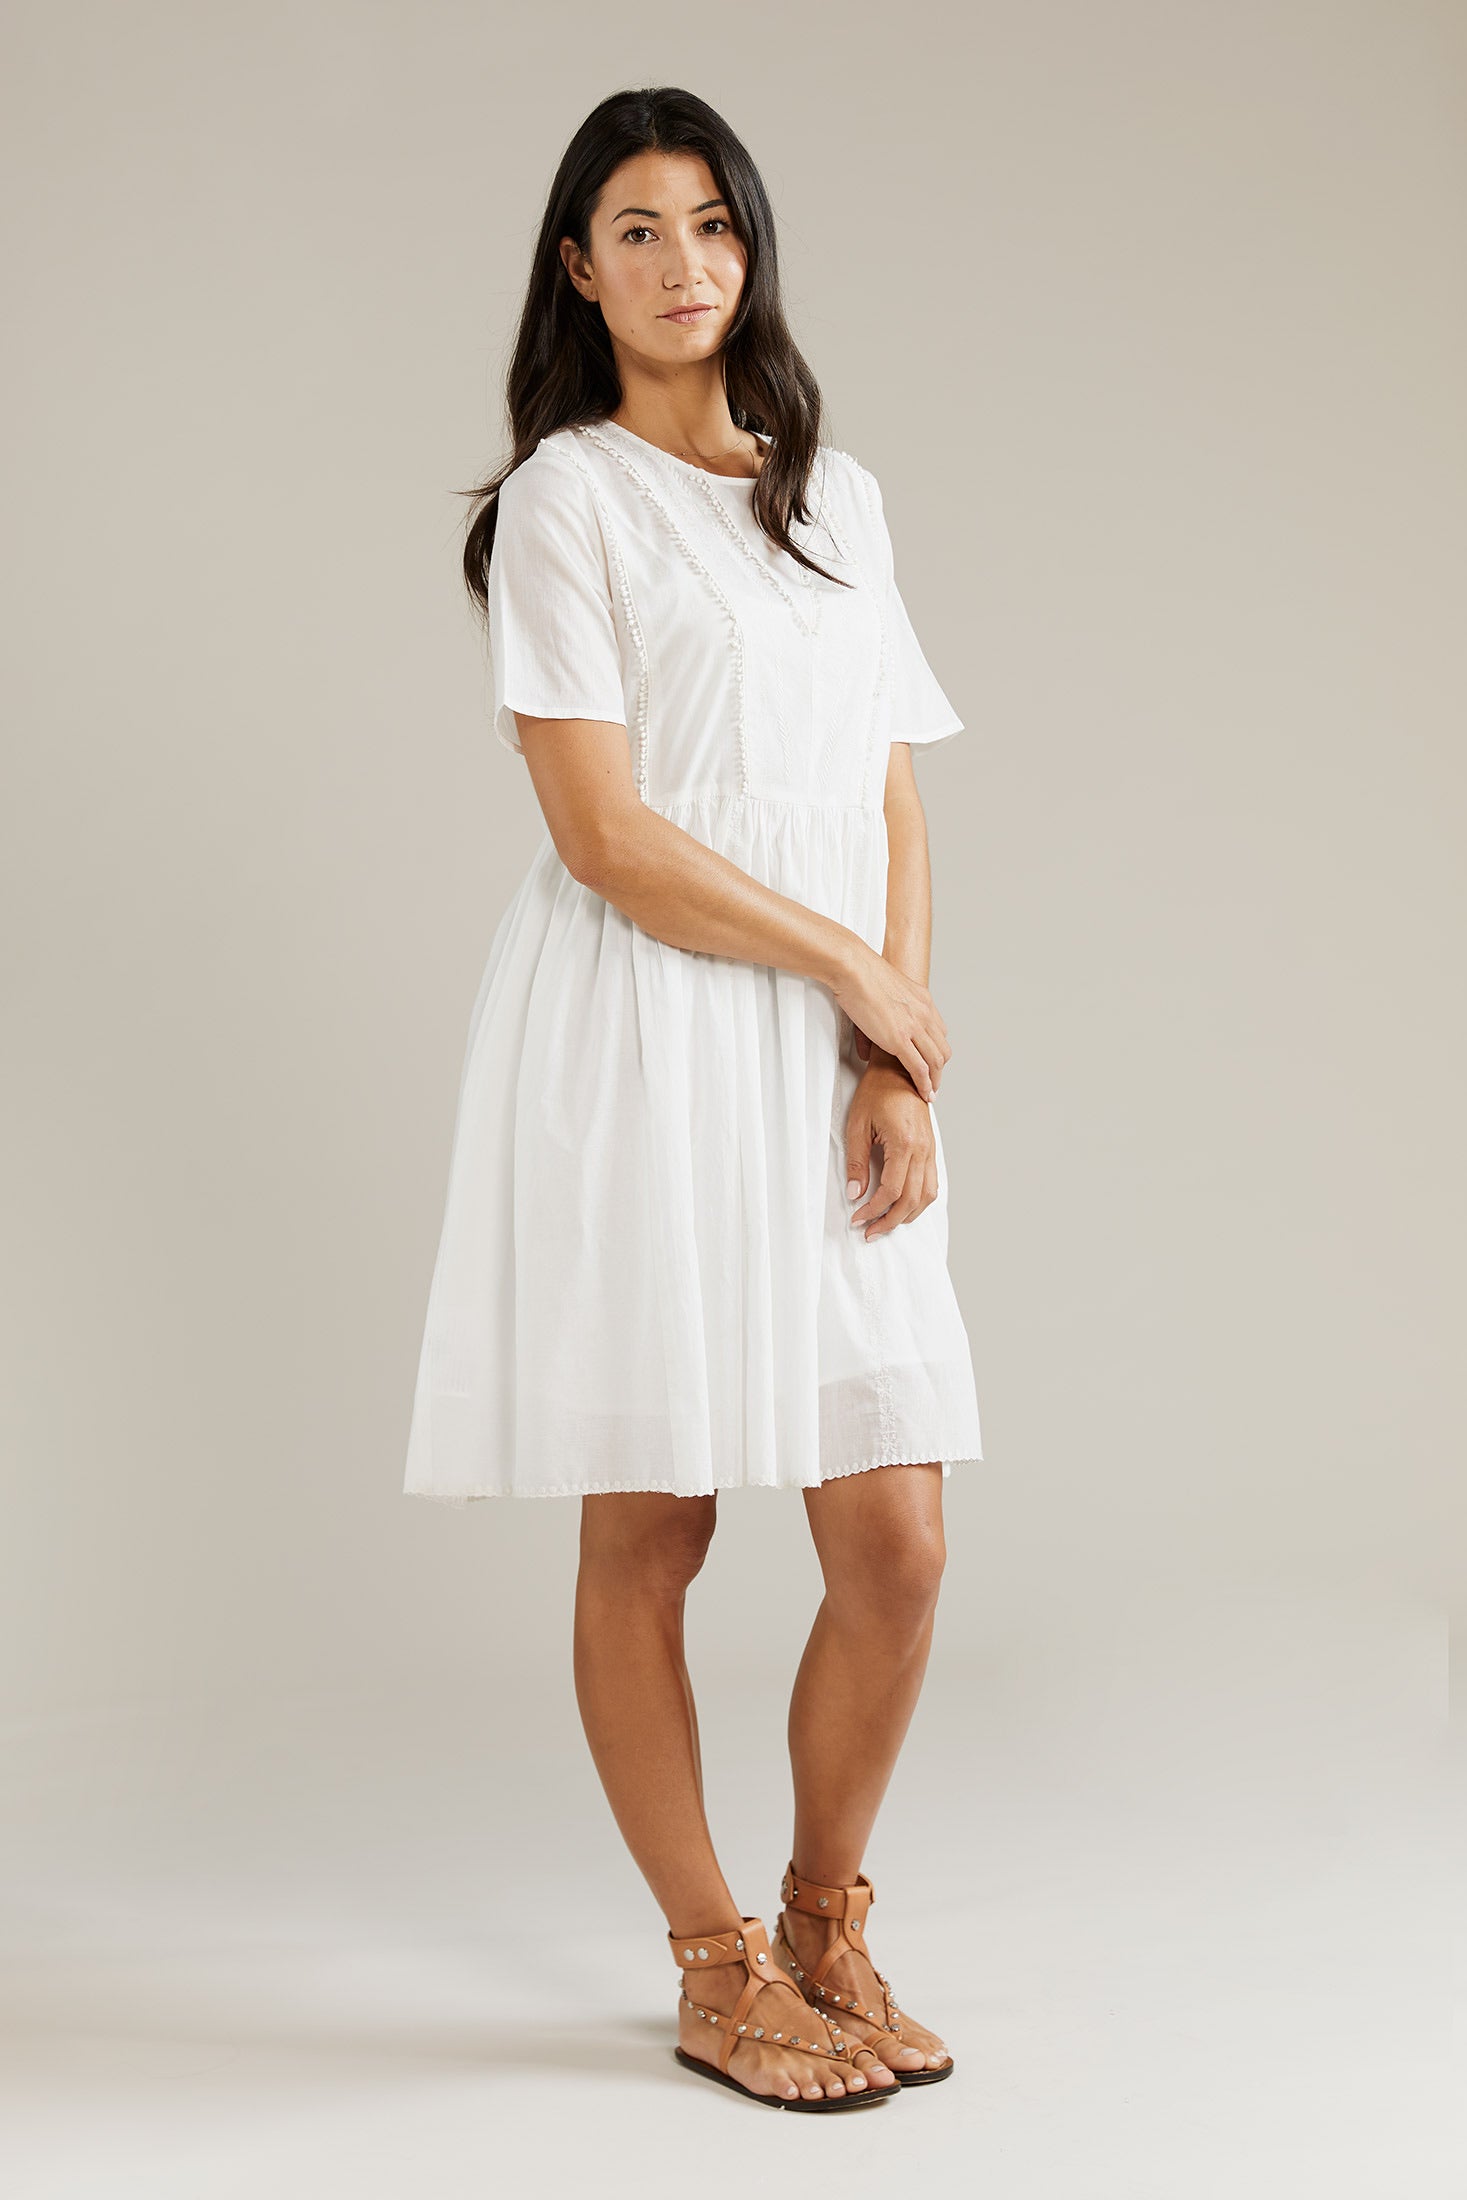 Into the Frey Embroidered Dress - White